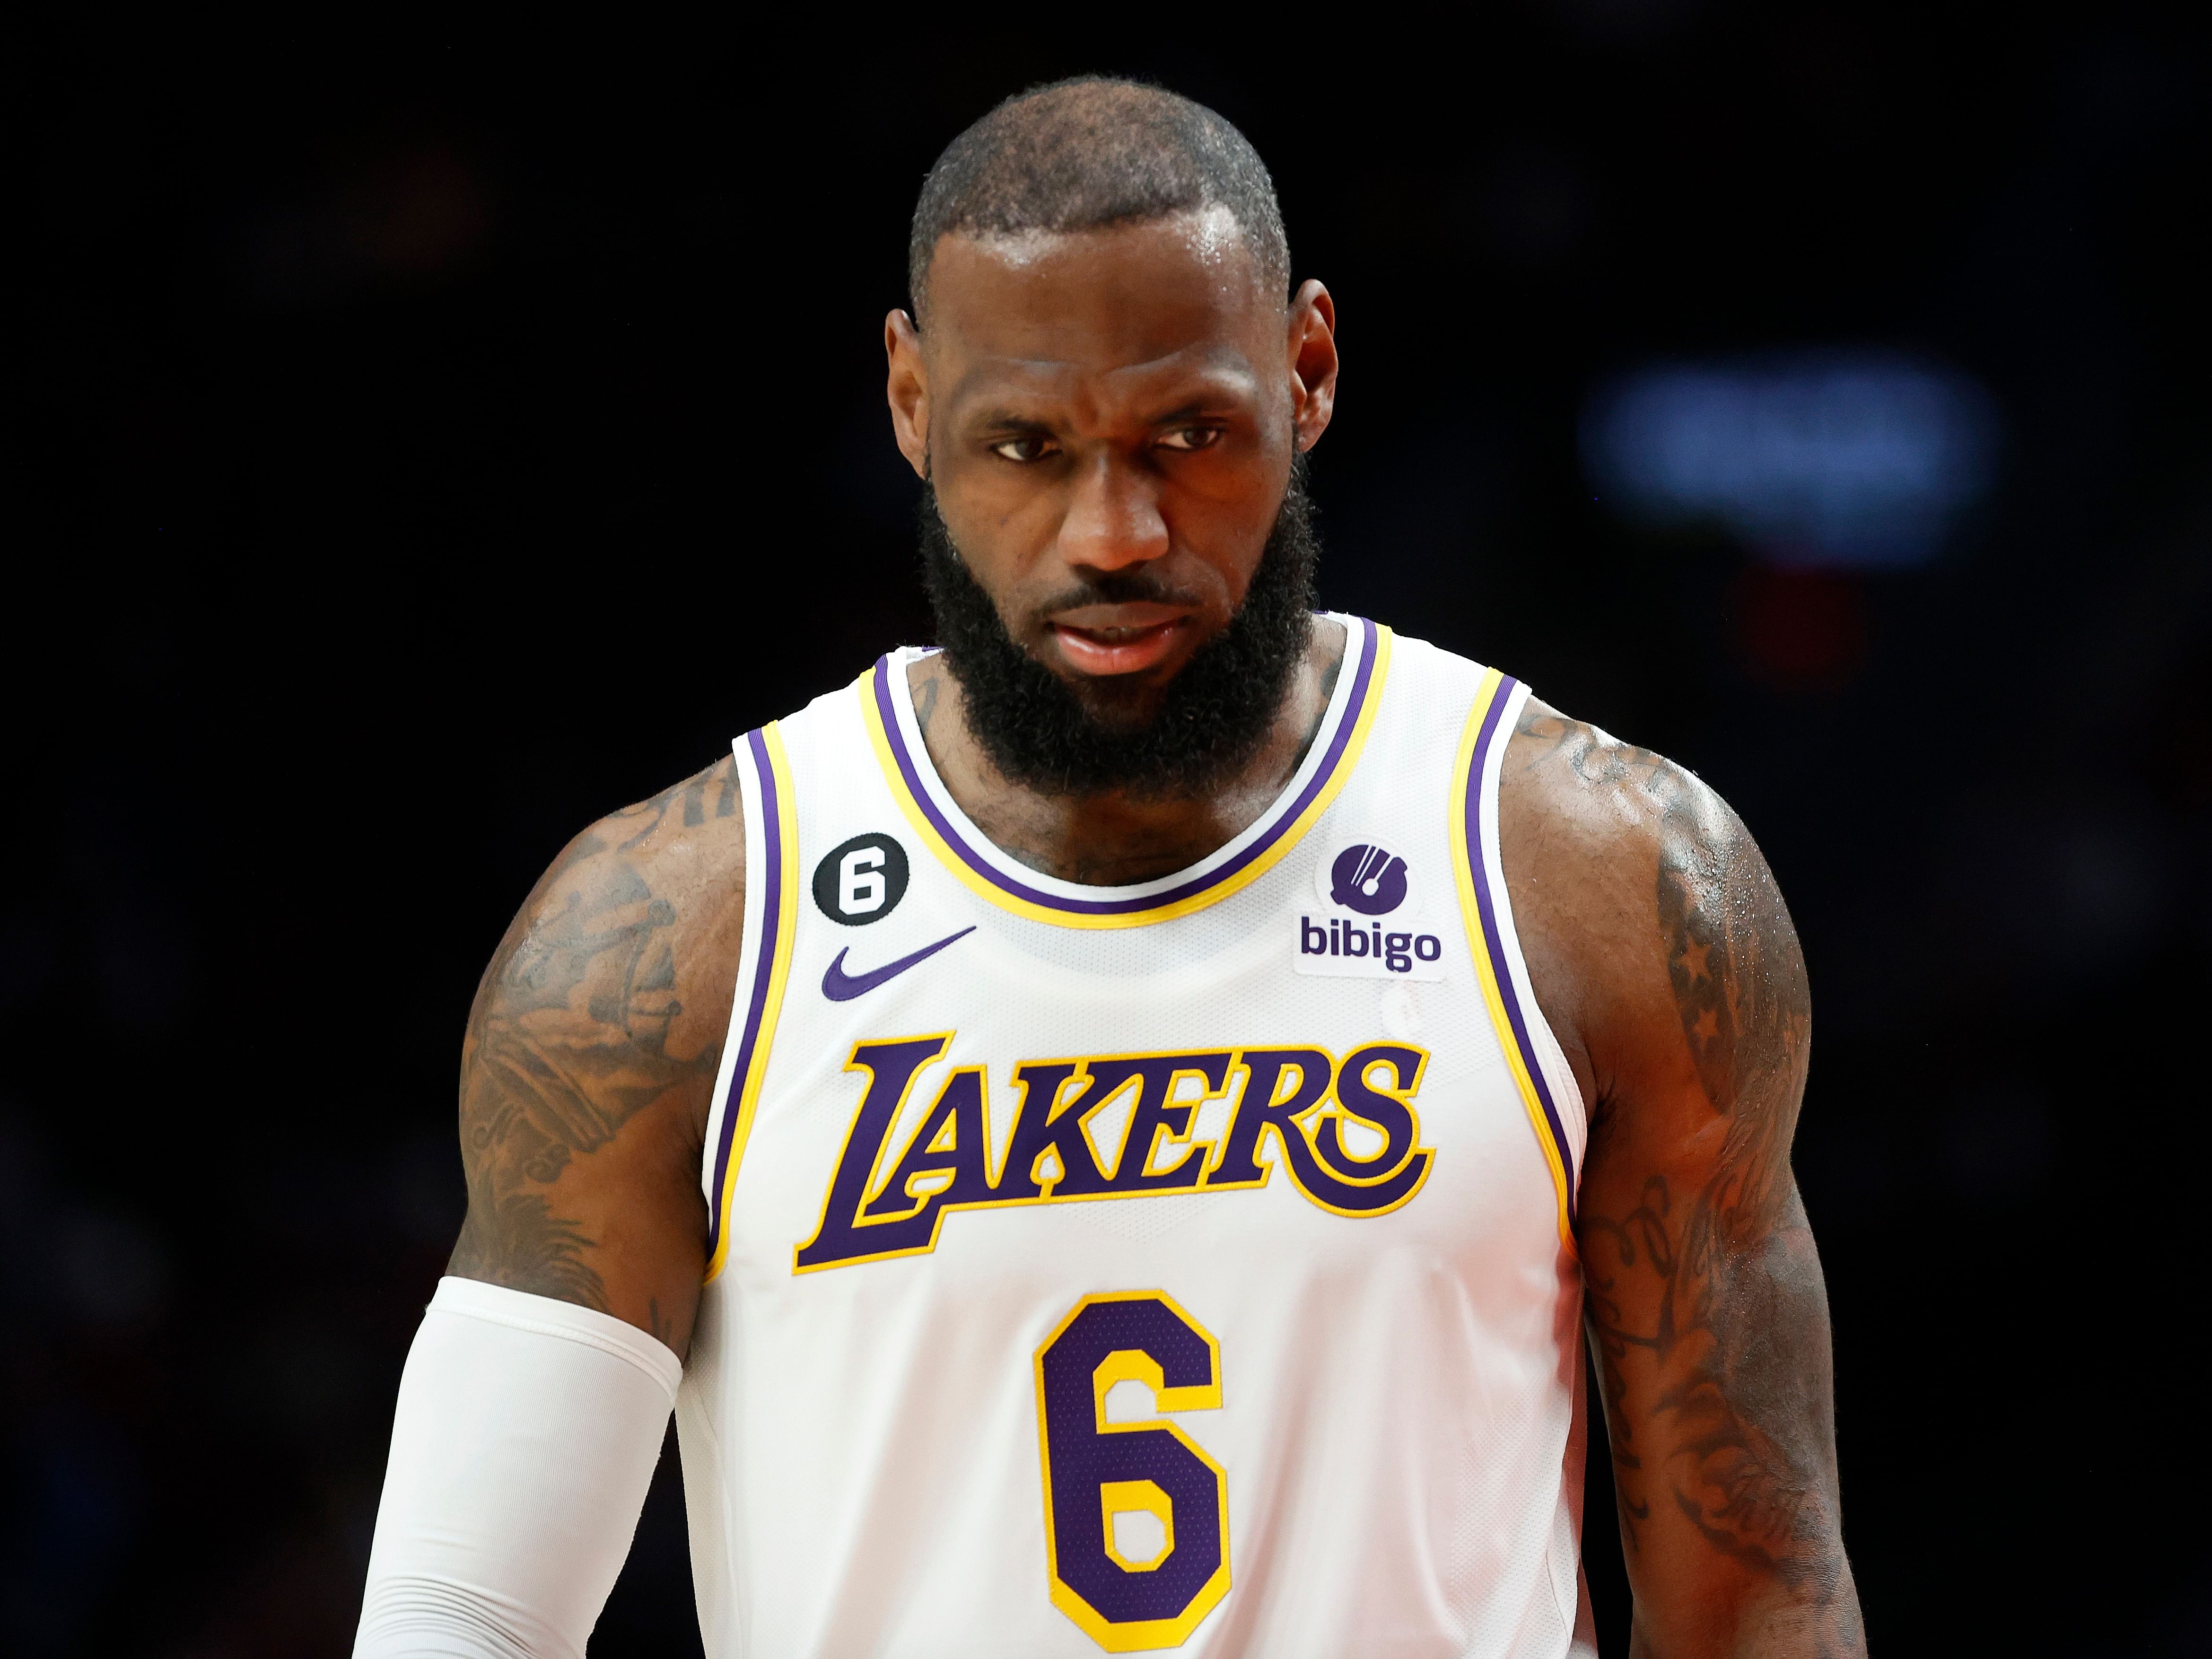 LeBron James of the LA Lakers during an NBA game.